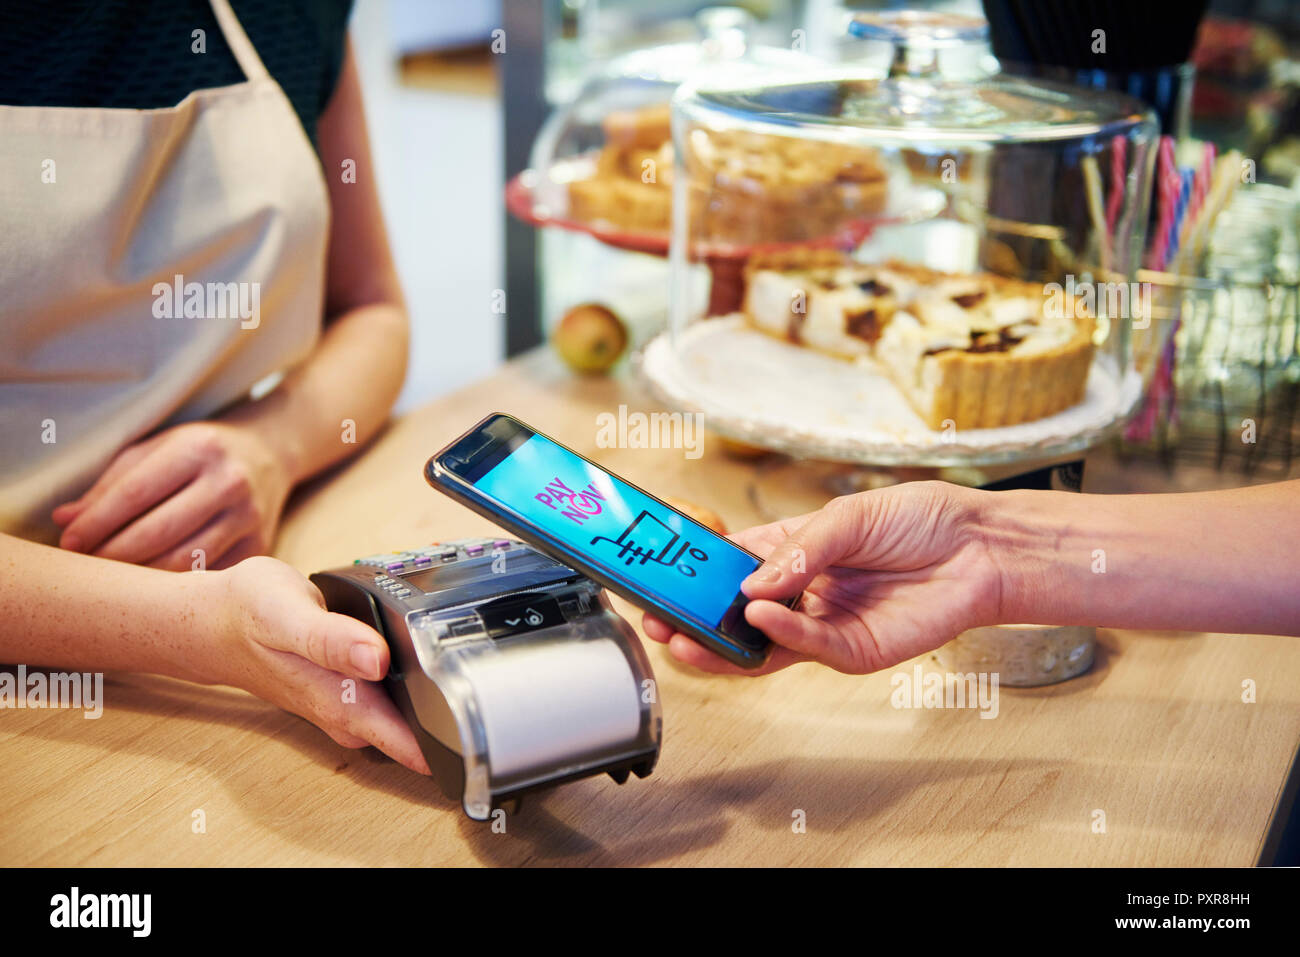 Customer paying cashless with smartphone in a cafe Stock Photo